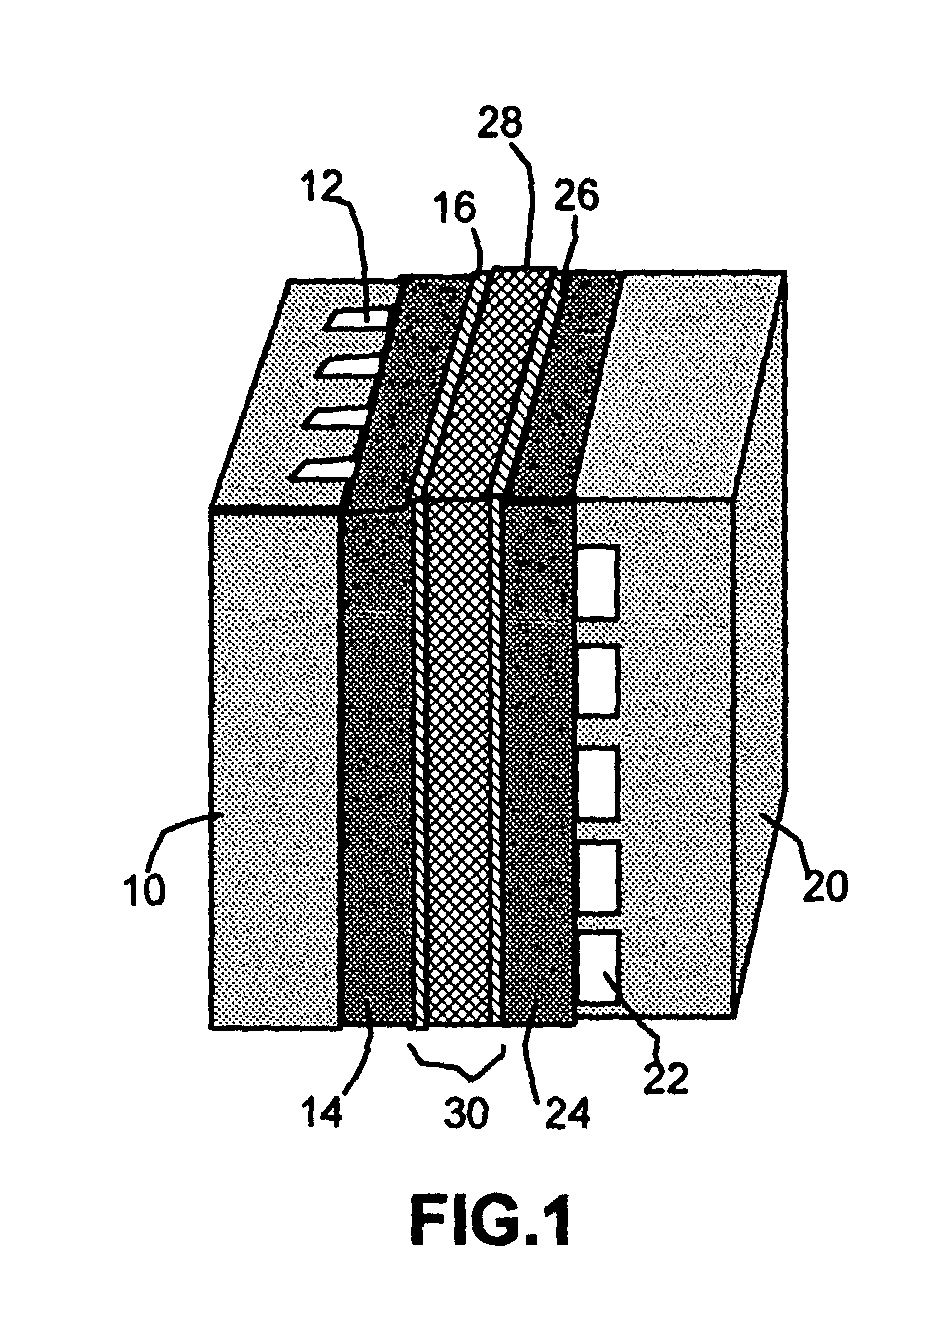 Self-moisturizing proton exchange membrane, membrane-electrode assembly and fuel cell